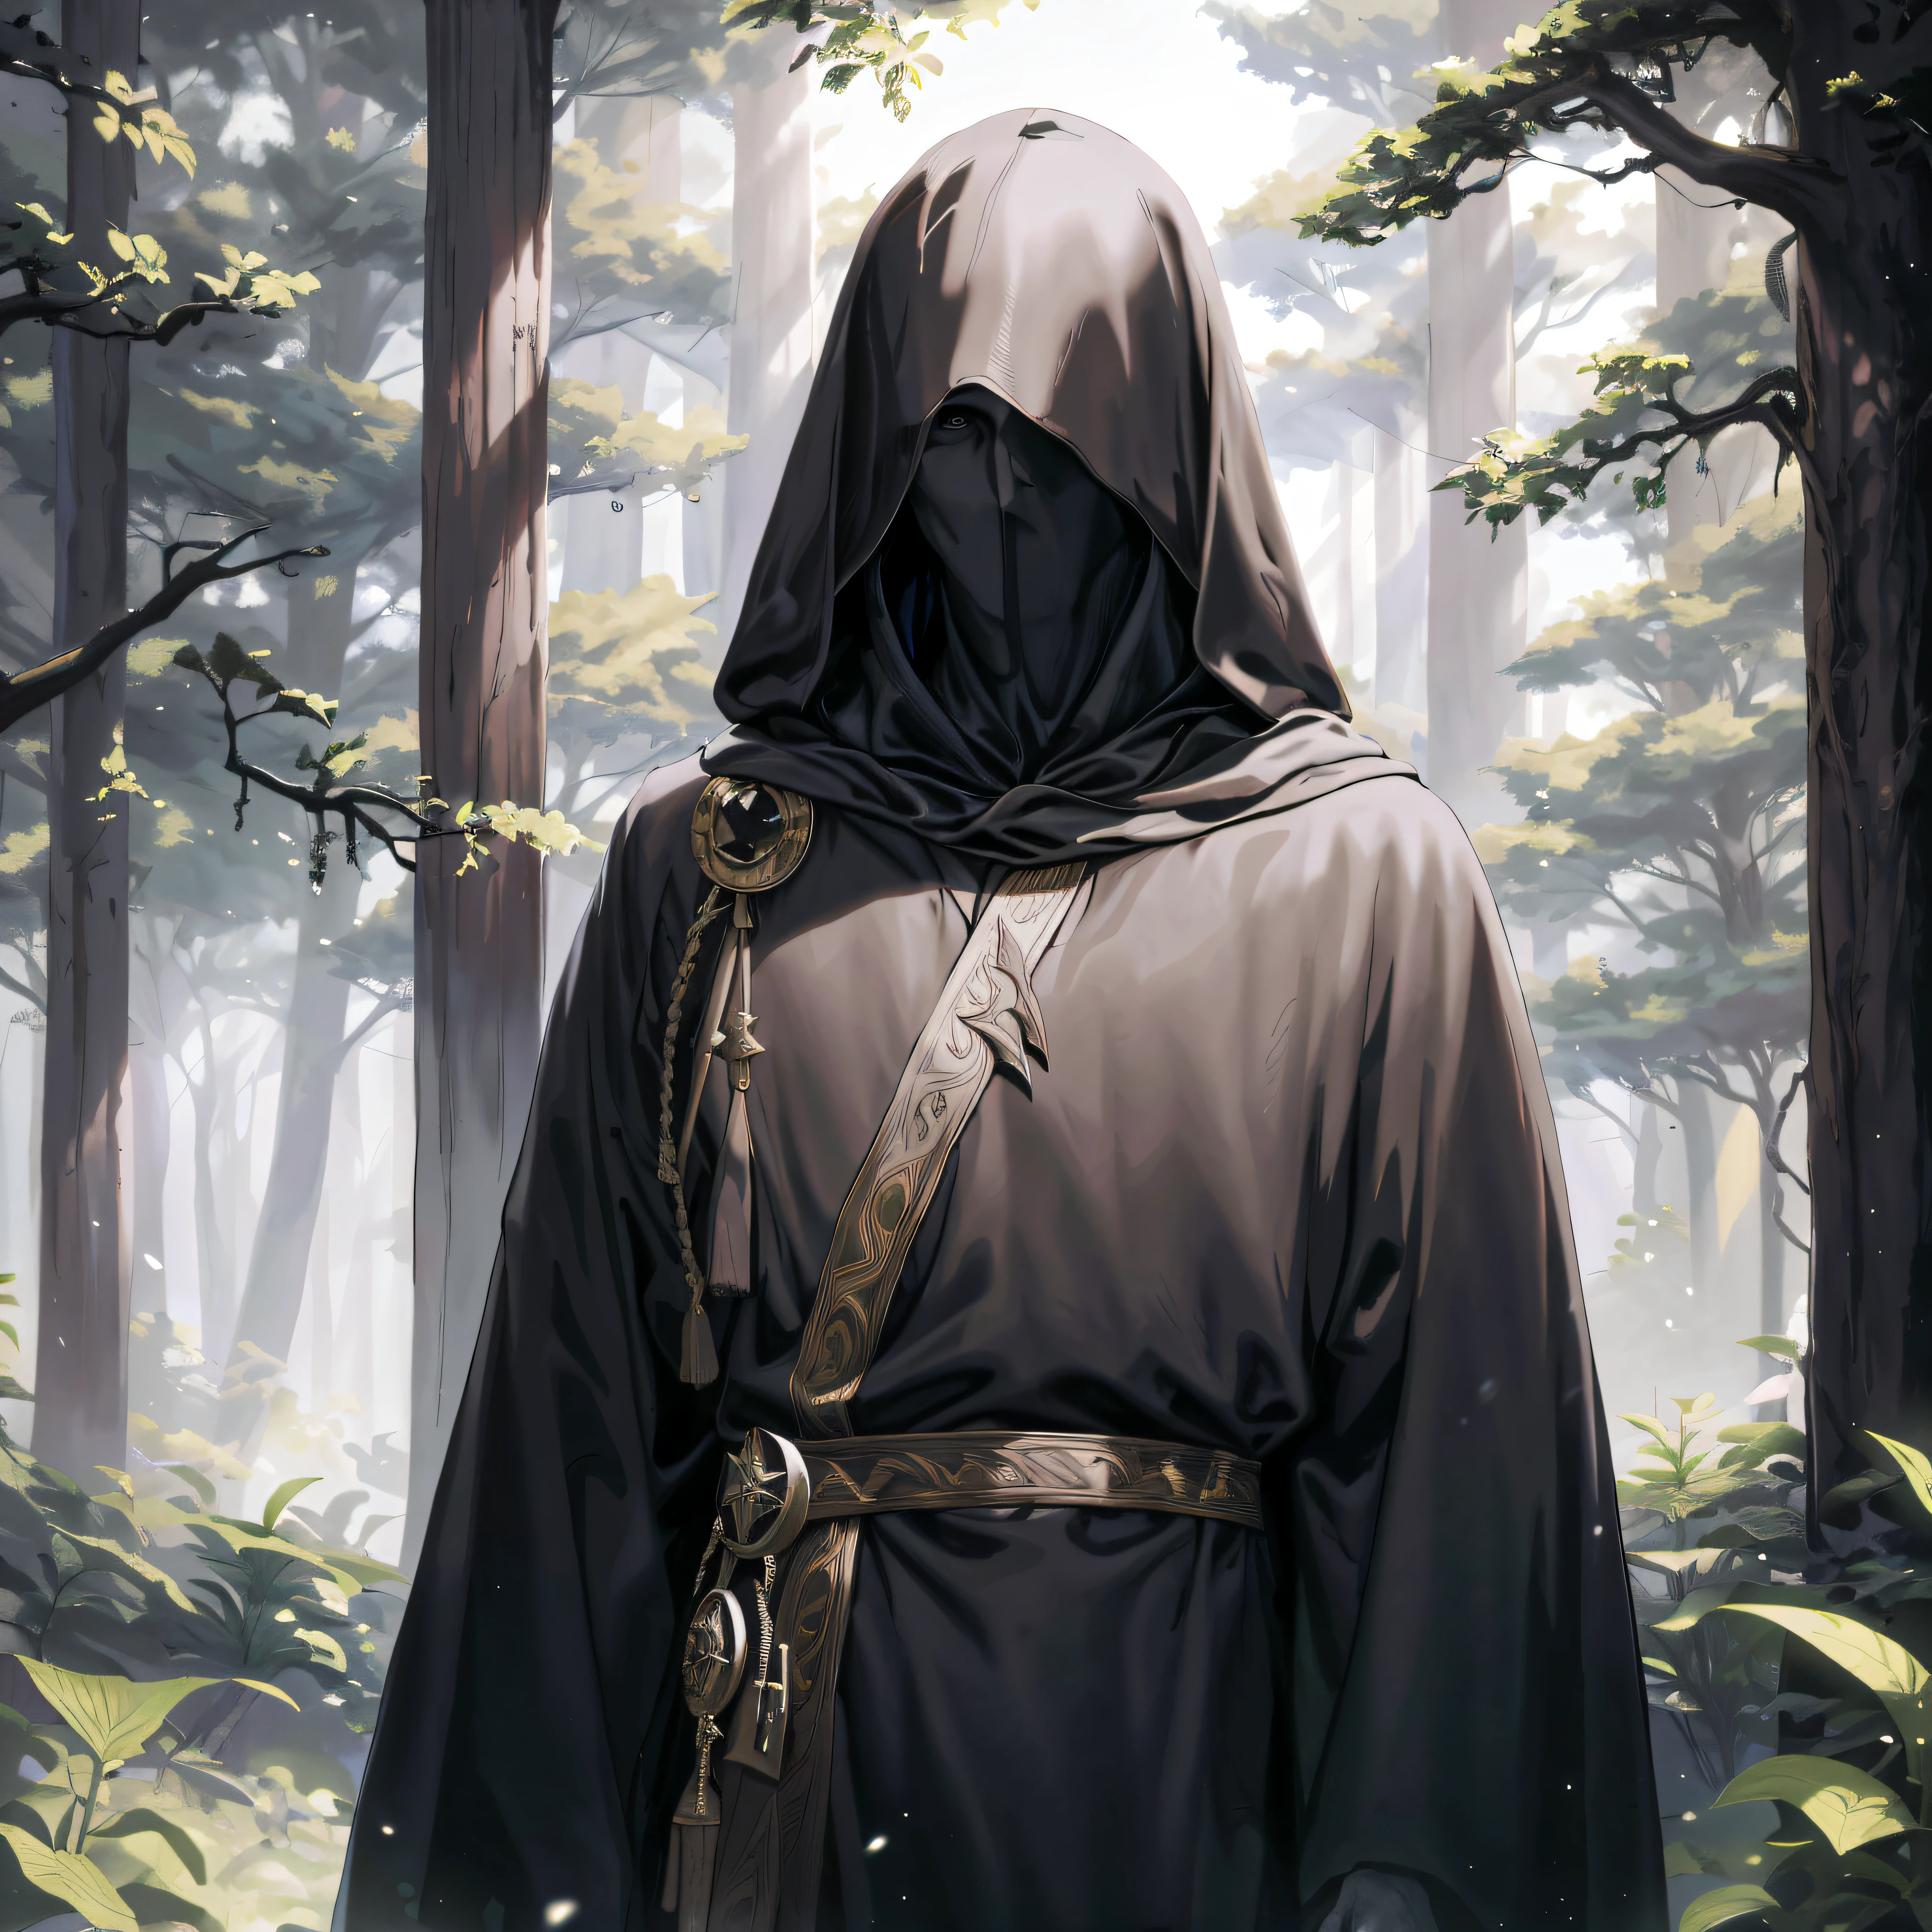 arafed hooded man in a forest with a hood on, cloaked, dark cloaked figure, portrait of a forest mage, dark hooded wraith, dark cloaked necromancer, dark robed, dark robe, hooded cloaked sith lord, wearing dark robe, black cloak hidden in shadows, wearing a flowing cloak, robed, dark flowing robe